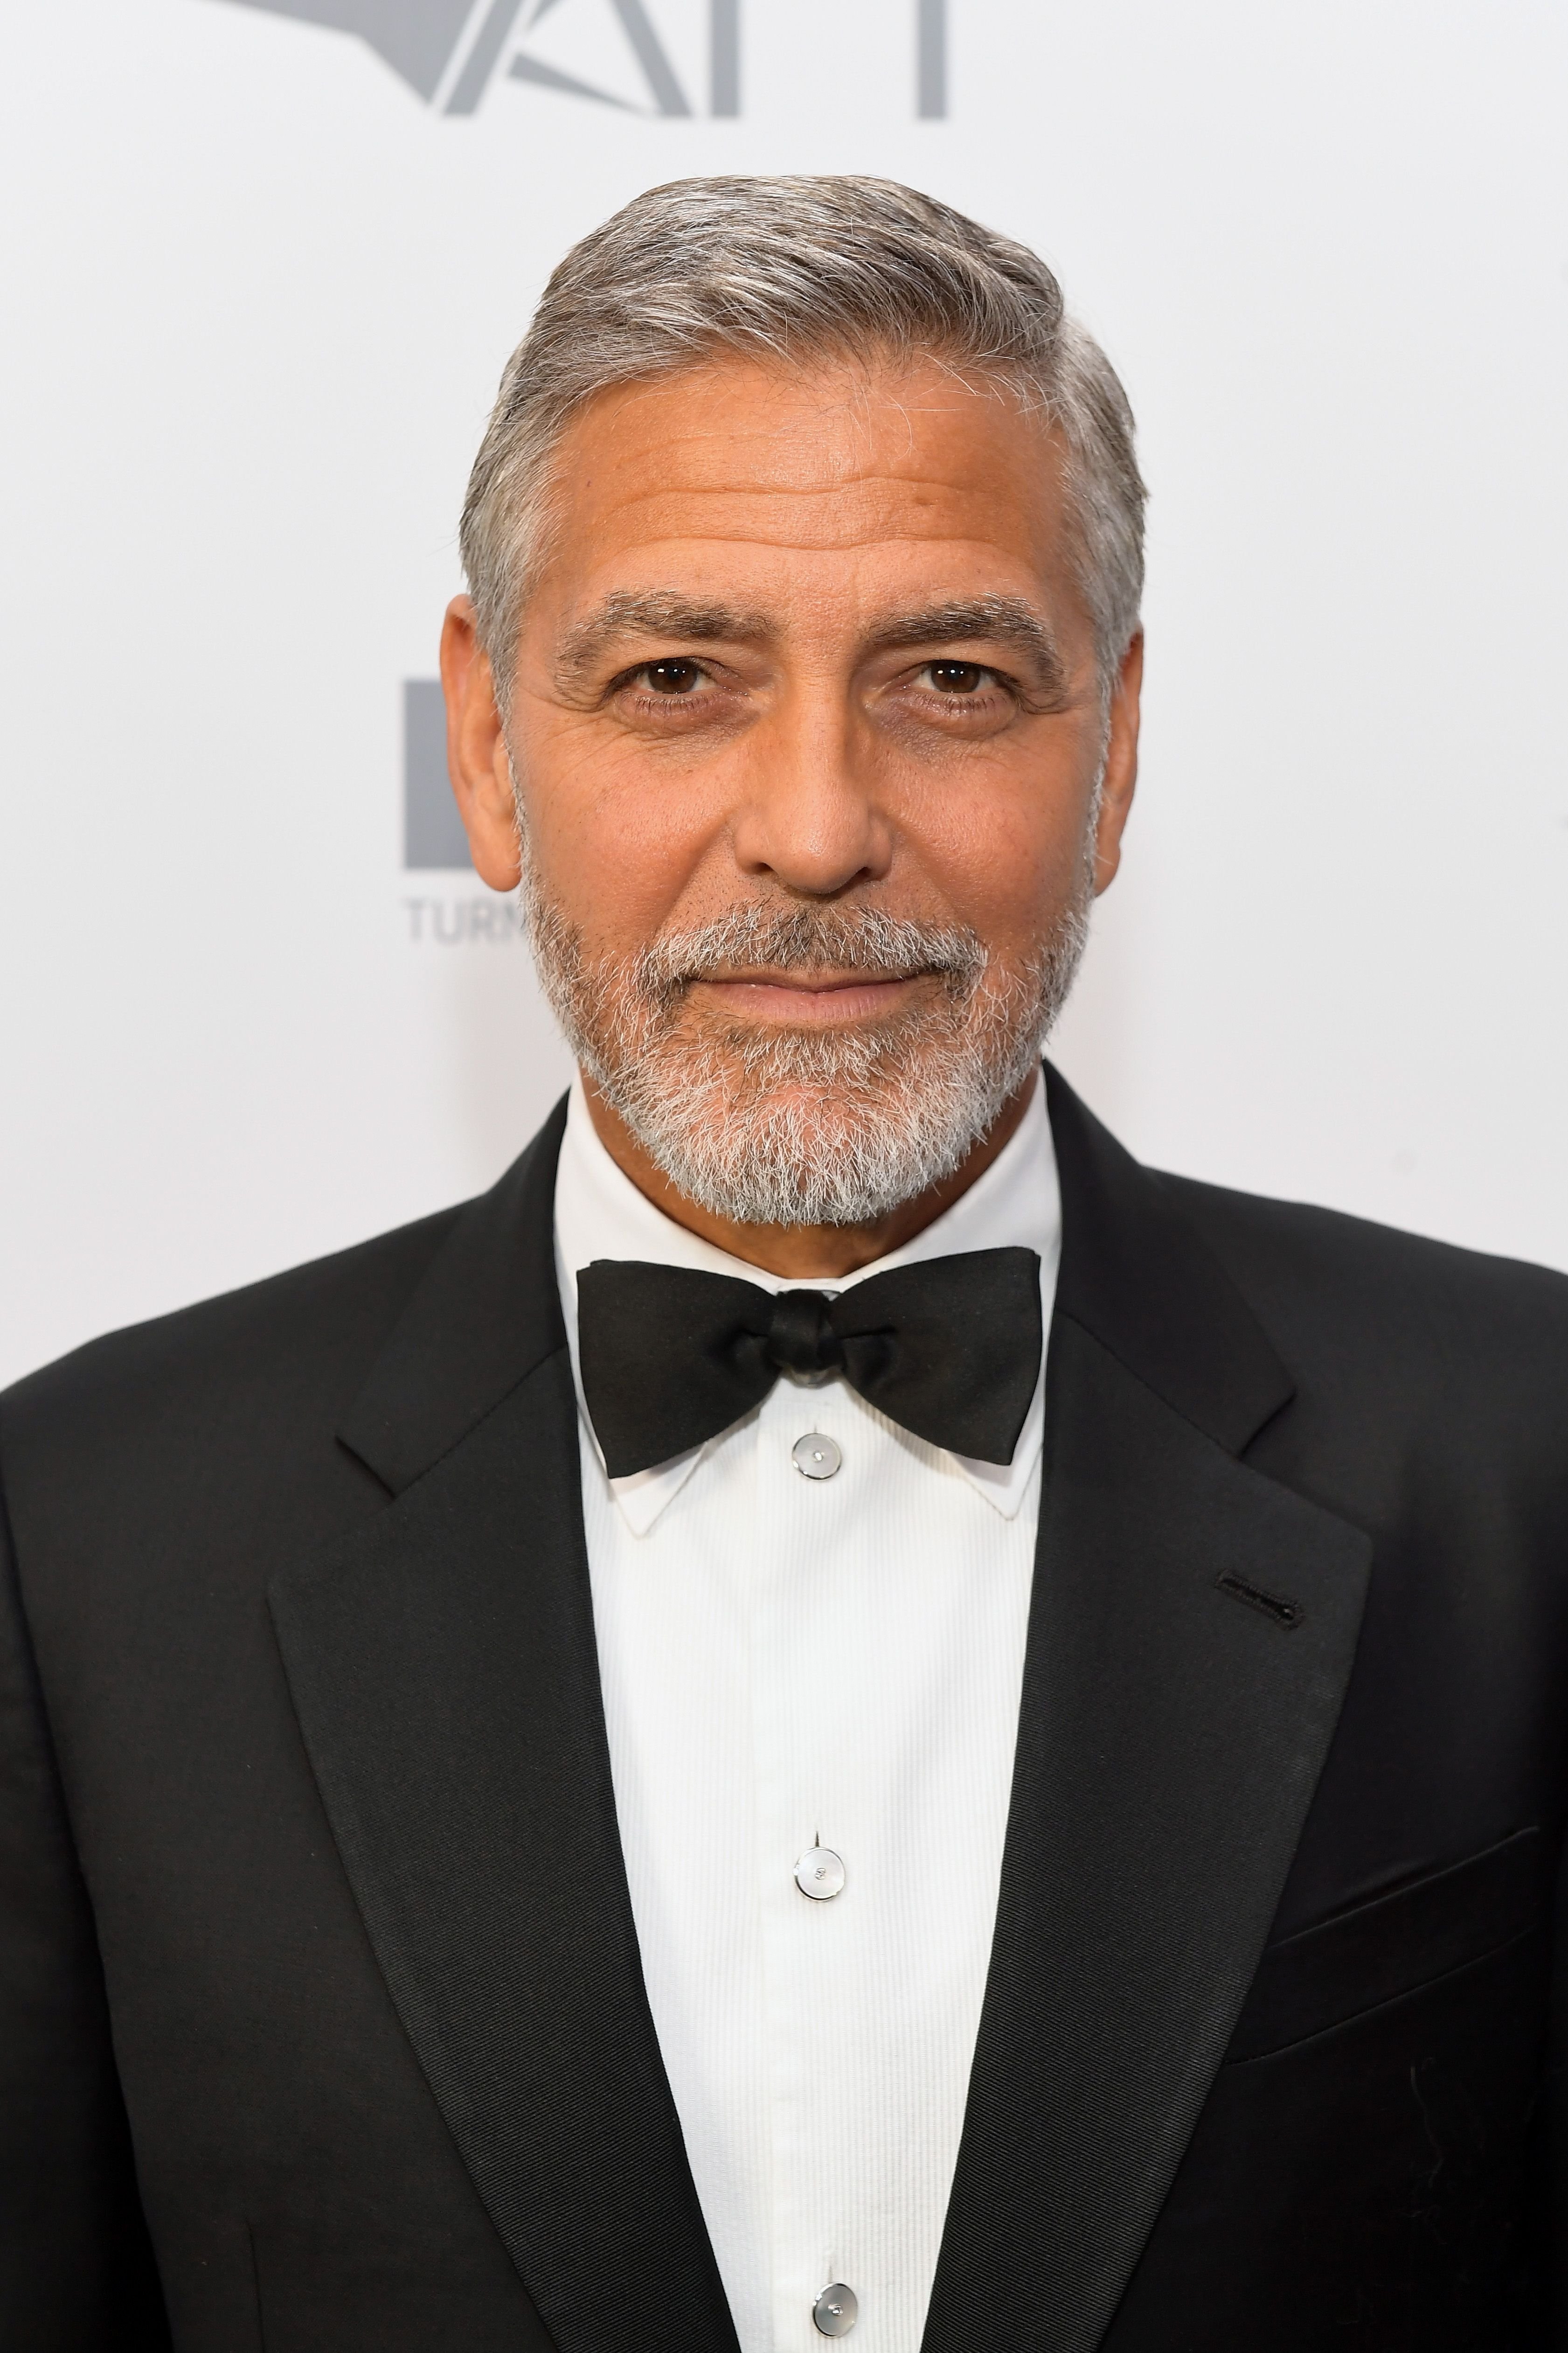 George Clooney at the American Film Institute's 46th Life Achievement Award Gala Tribute to George Clooney at Dolby Theatre on June 7, 2018 | Photo: Getty Images